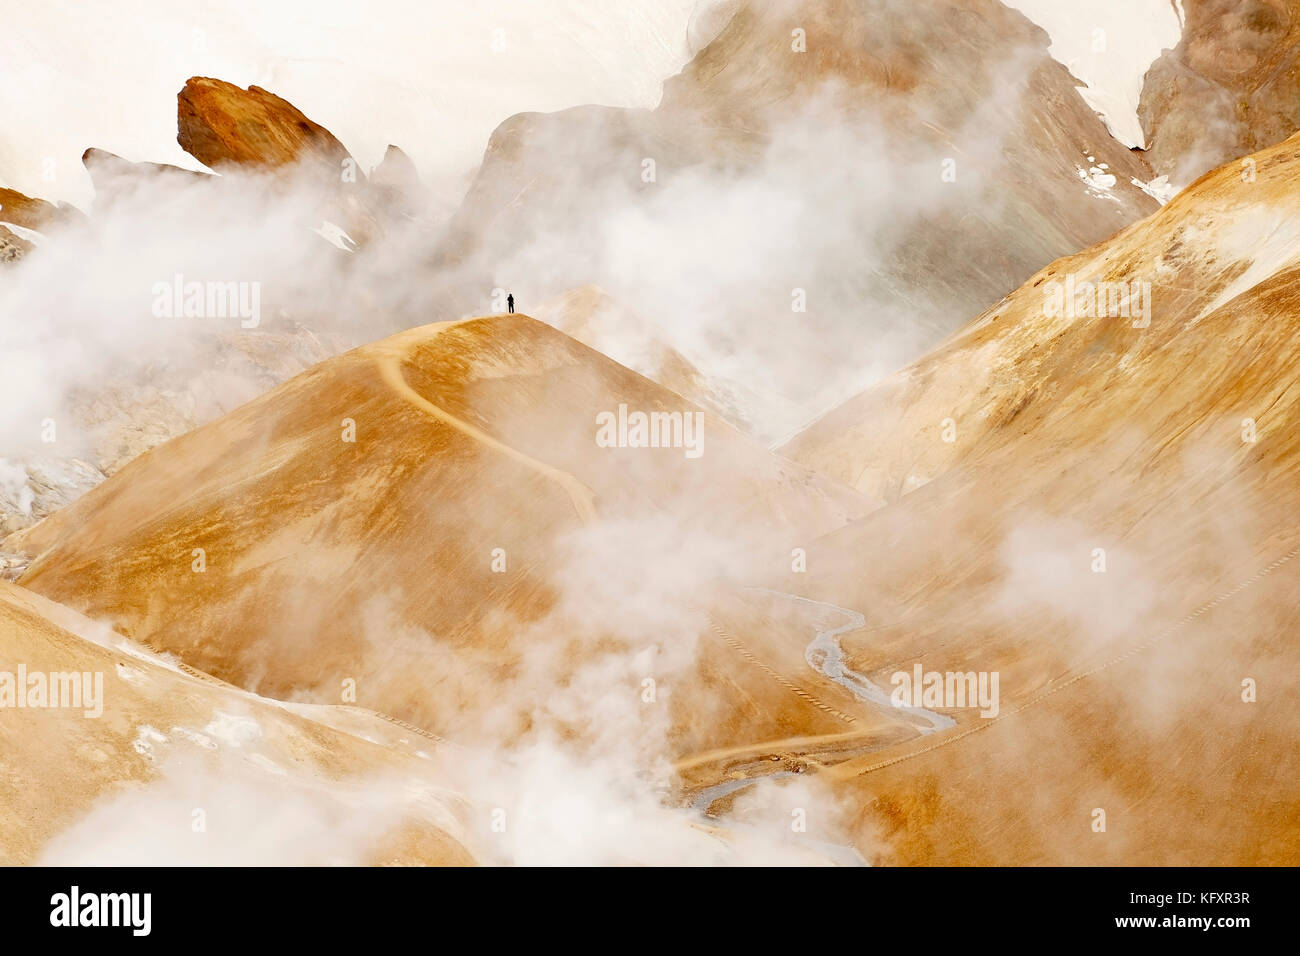 A human being in the high temperature area with steaming hot springs, rhyolite mountains and snow, Hveradalir, Kerlingarfjöll Stock Photo